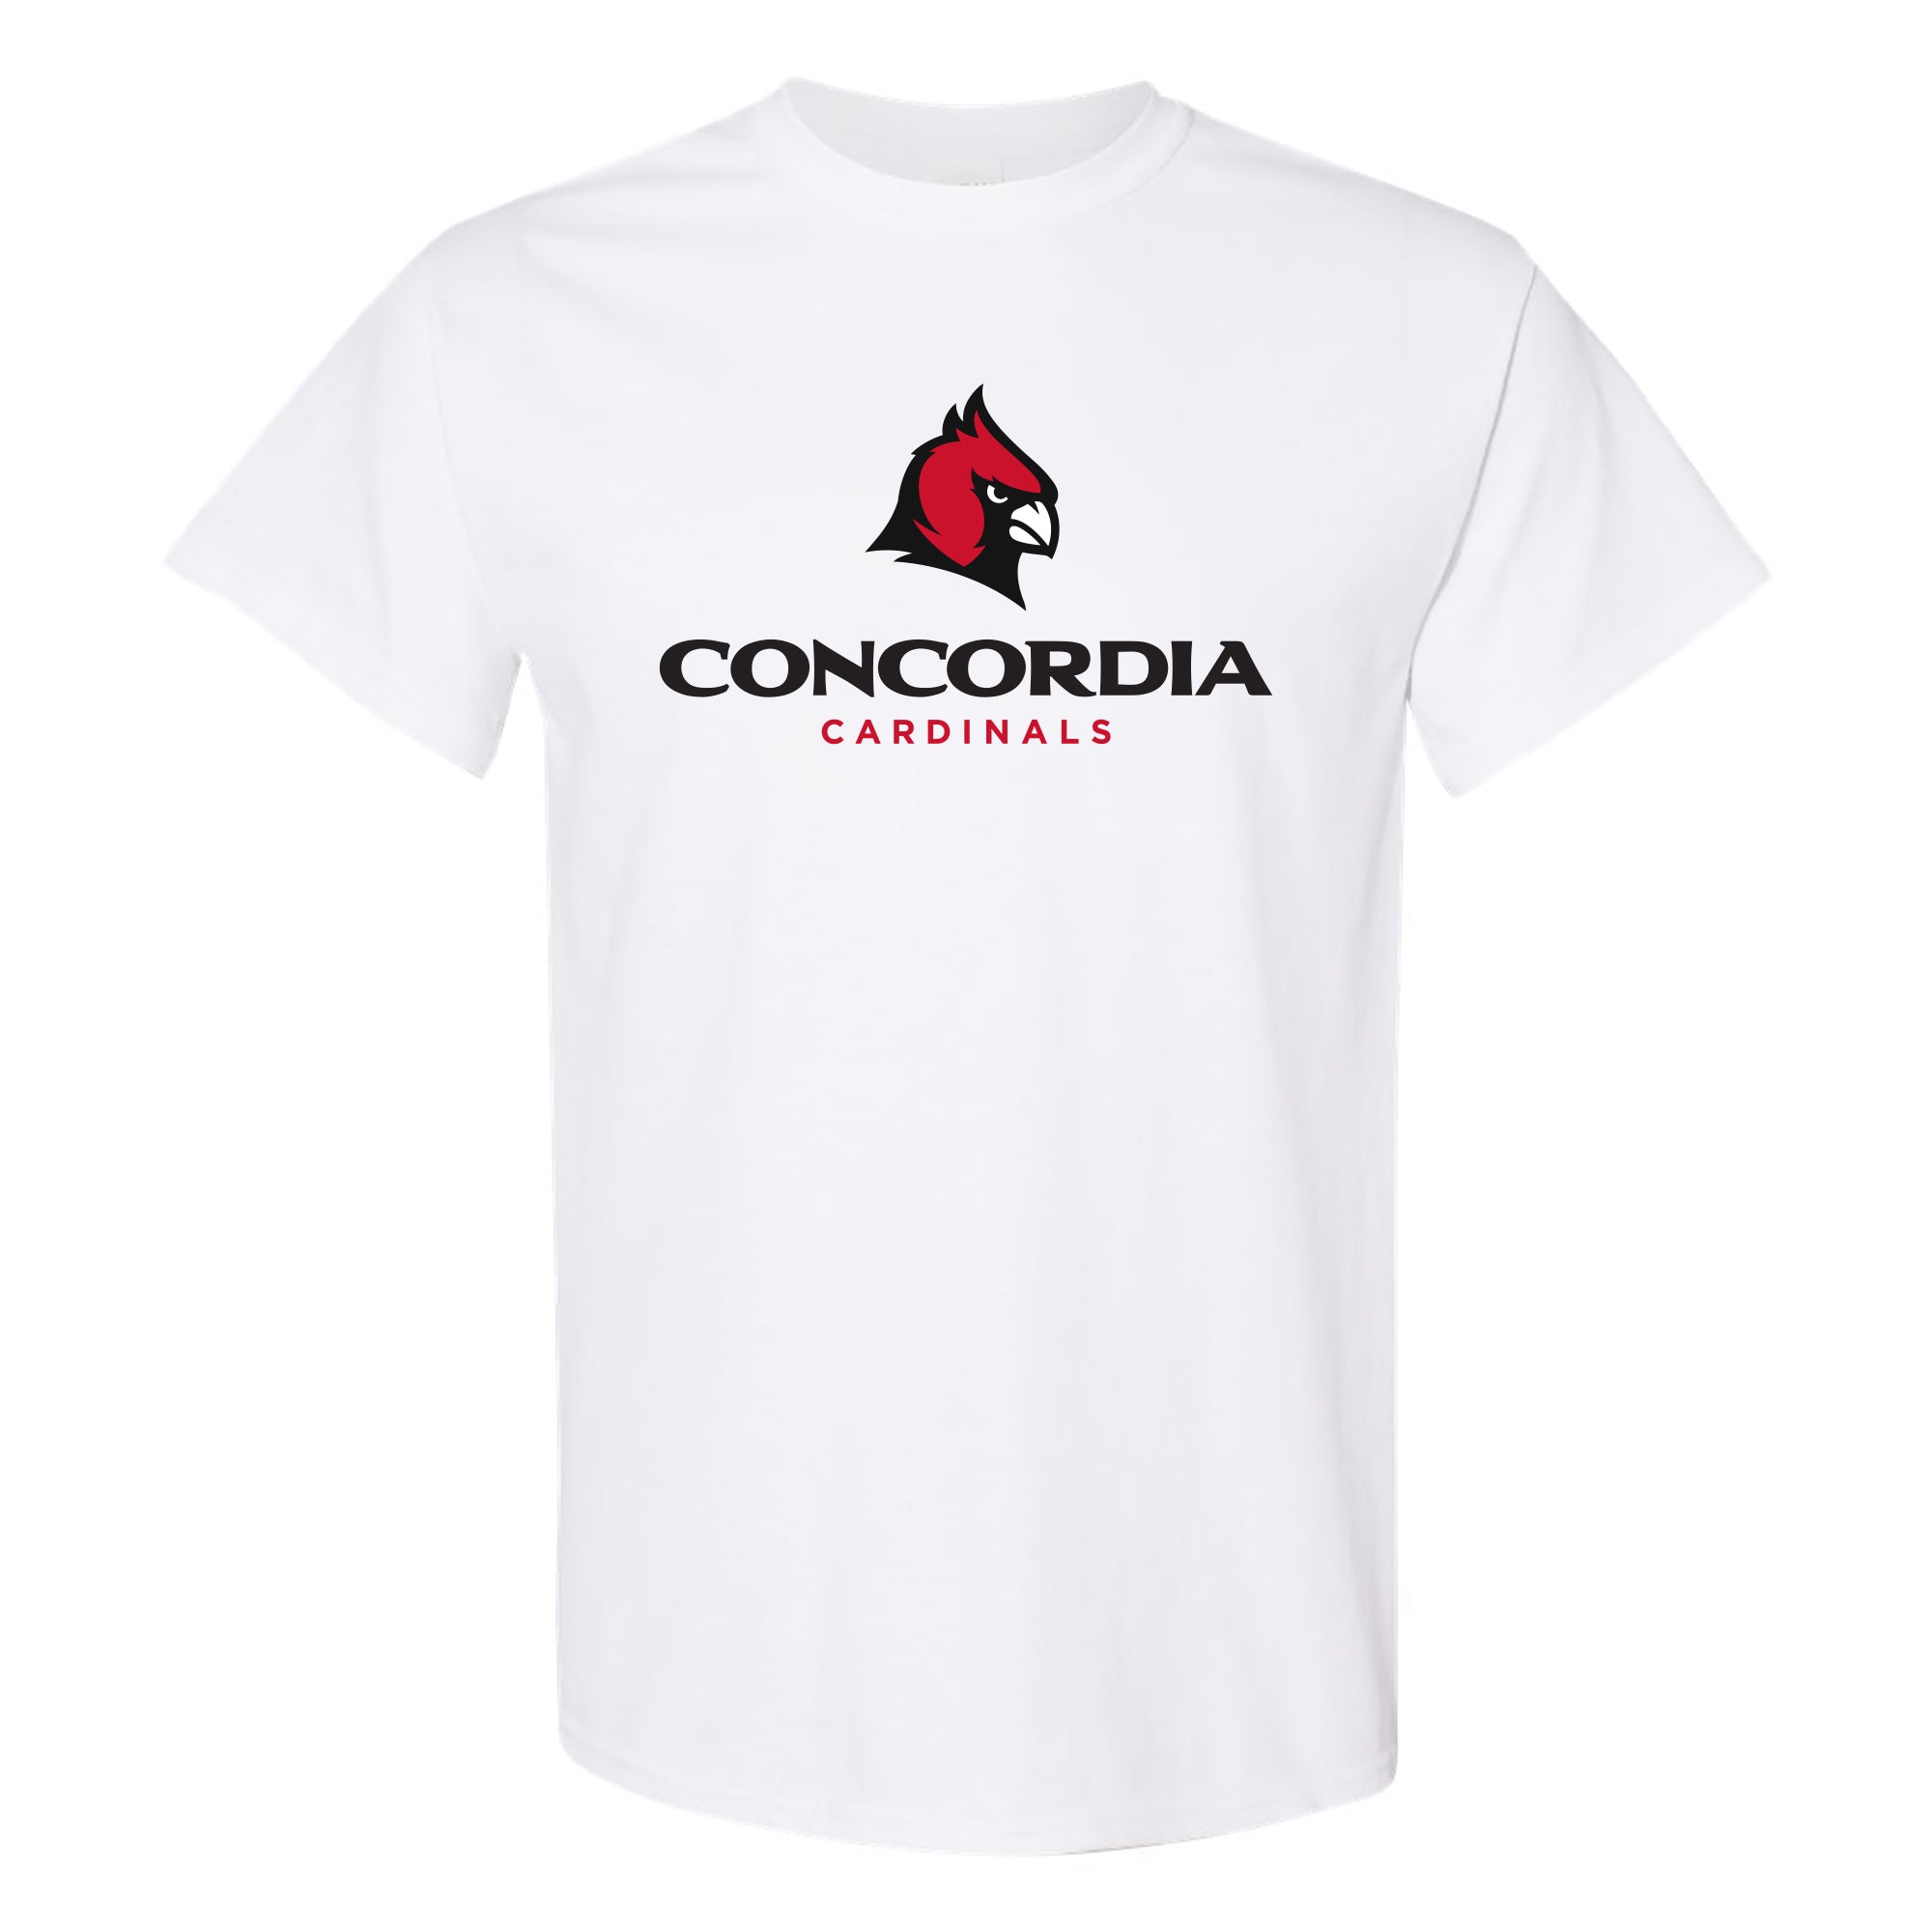 Concordia Welcome Weekend Unisex T-Shirt - White